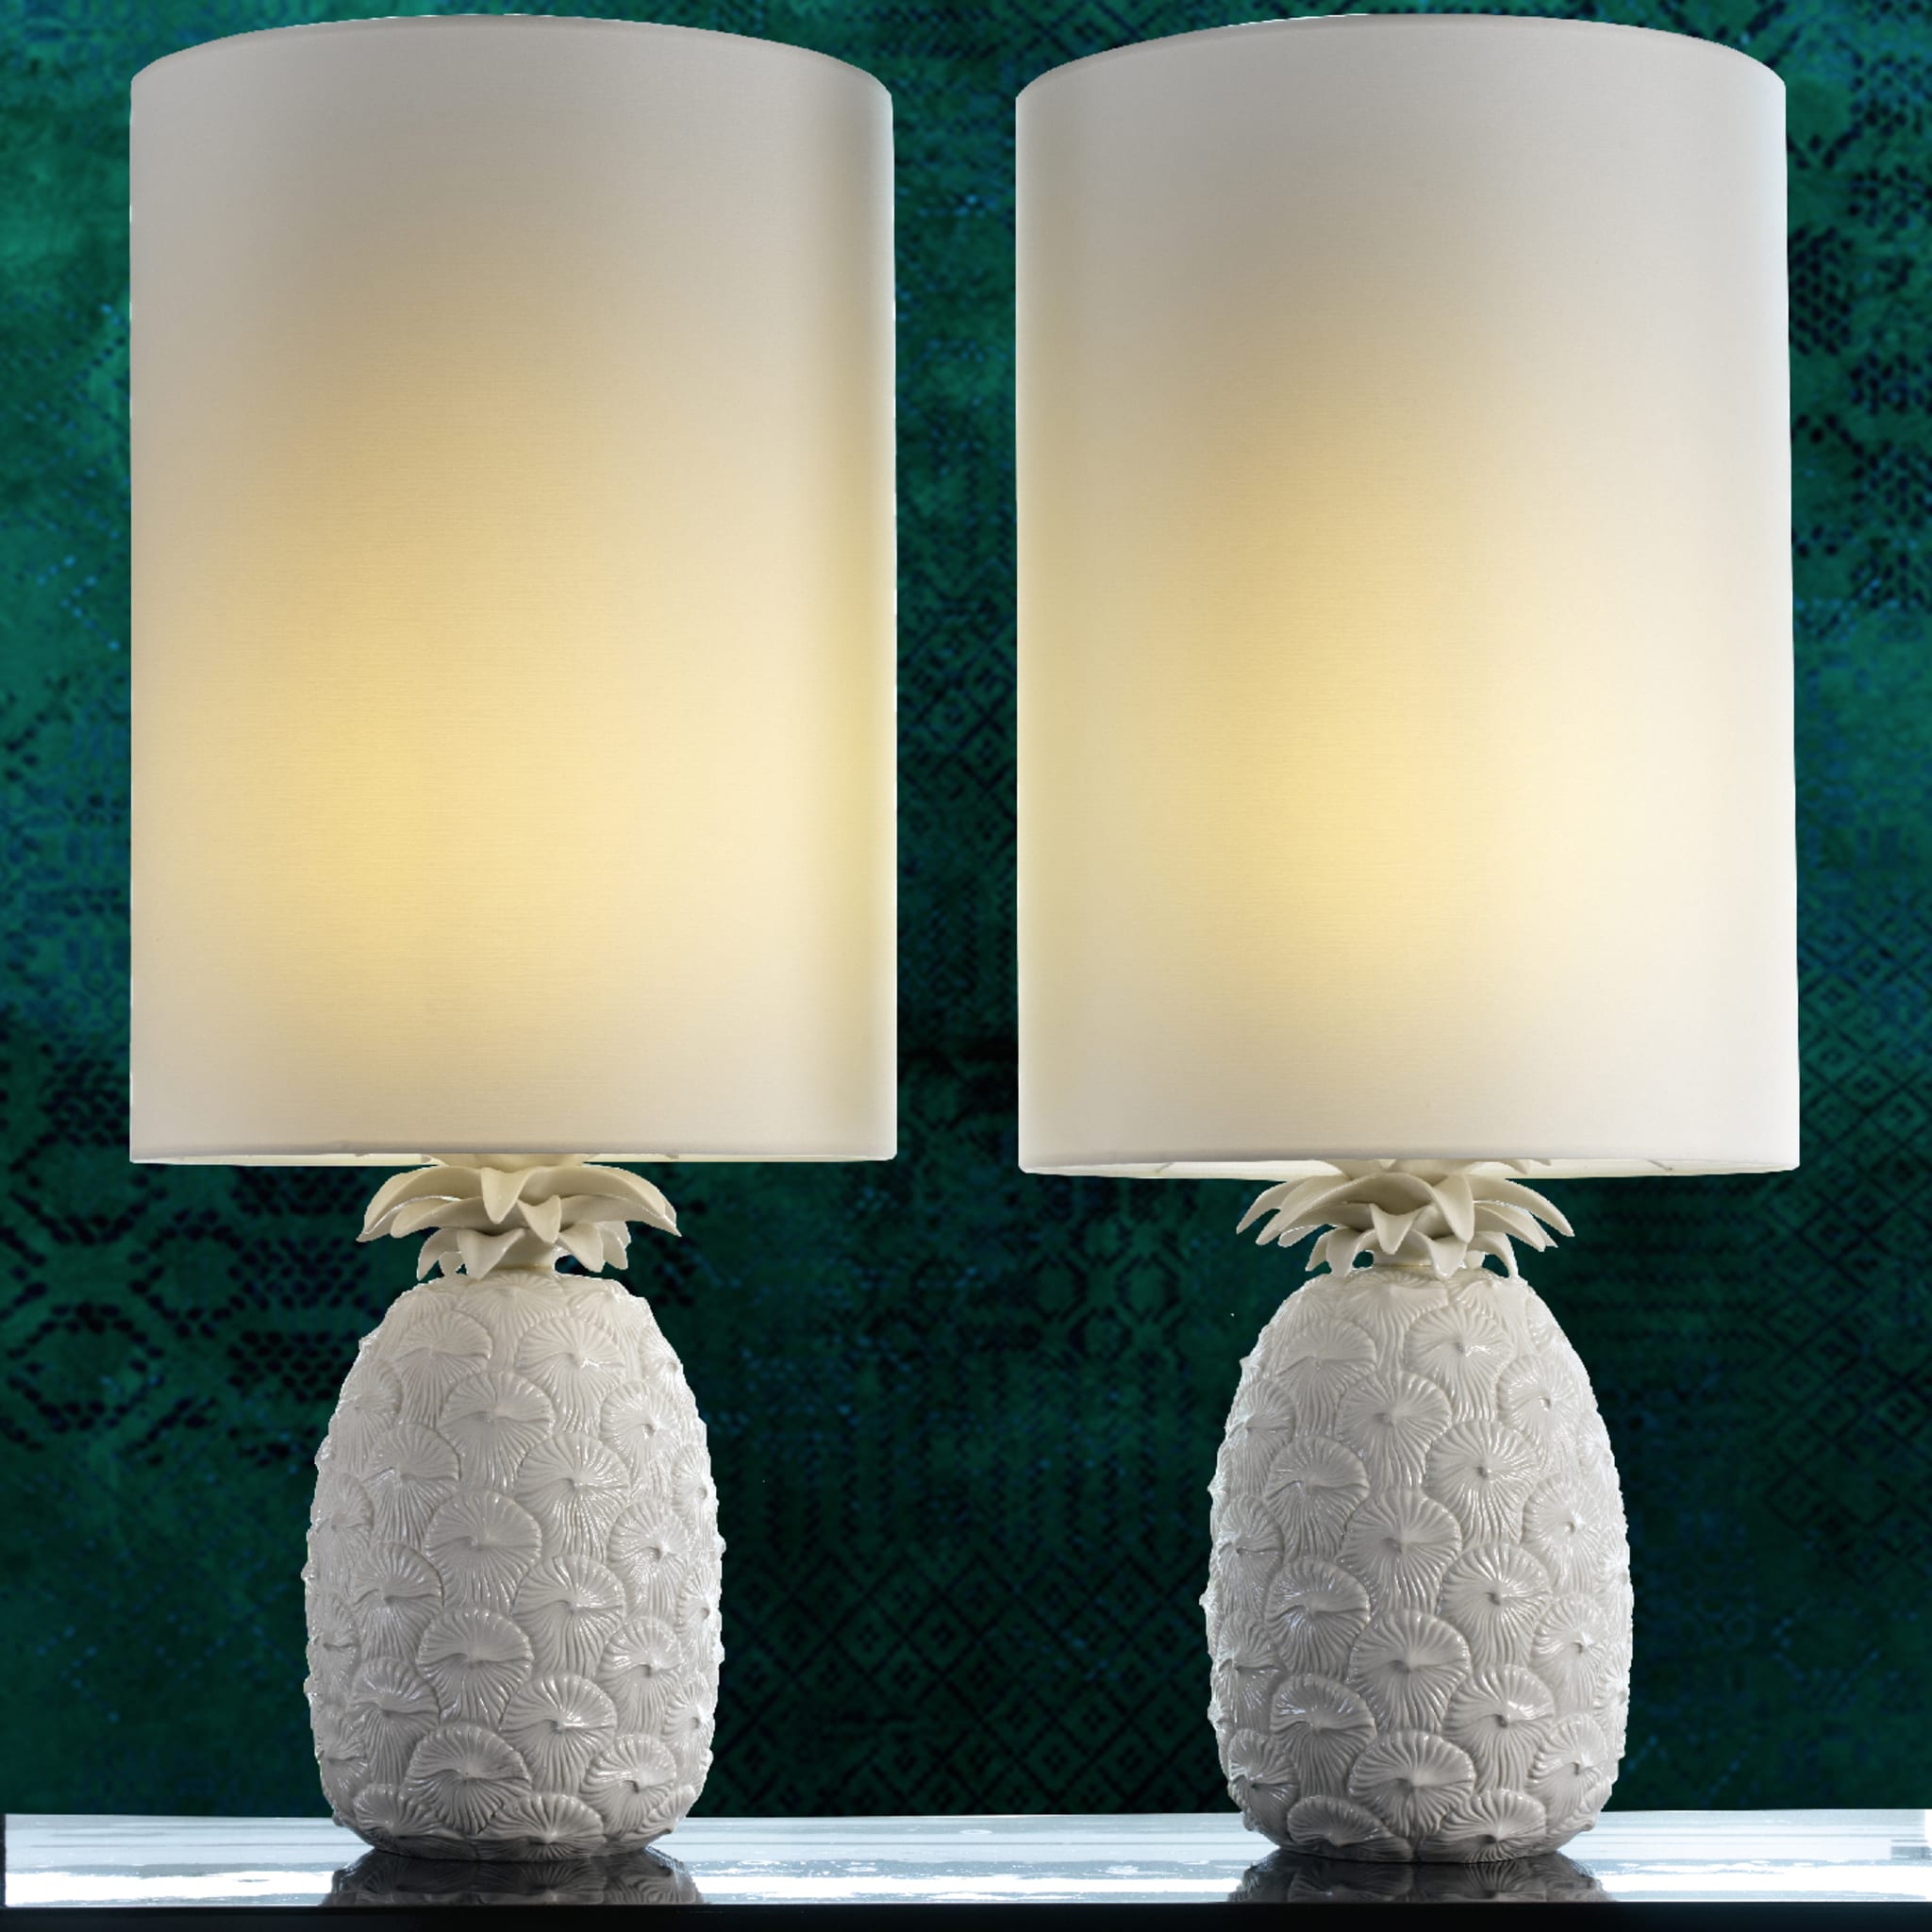 Pineapple Large White Table Lamp - Alternative view 1